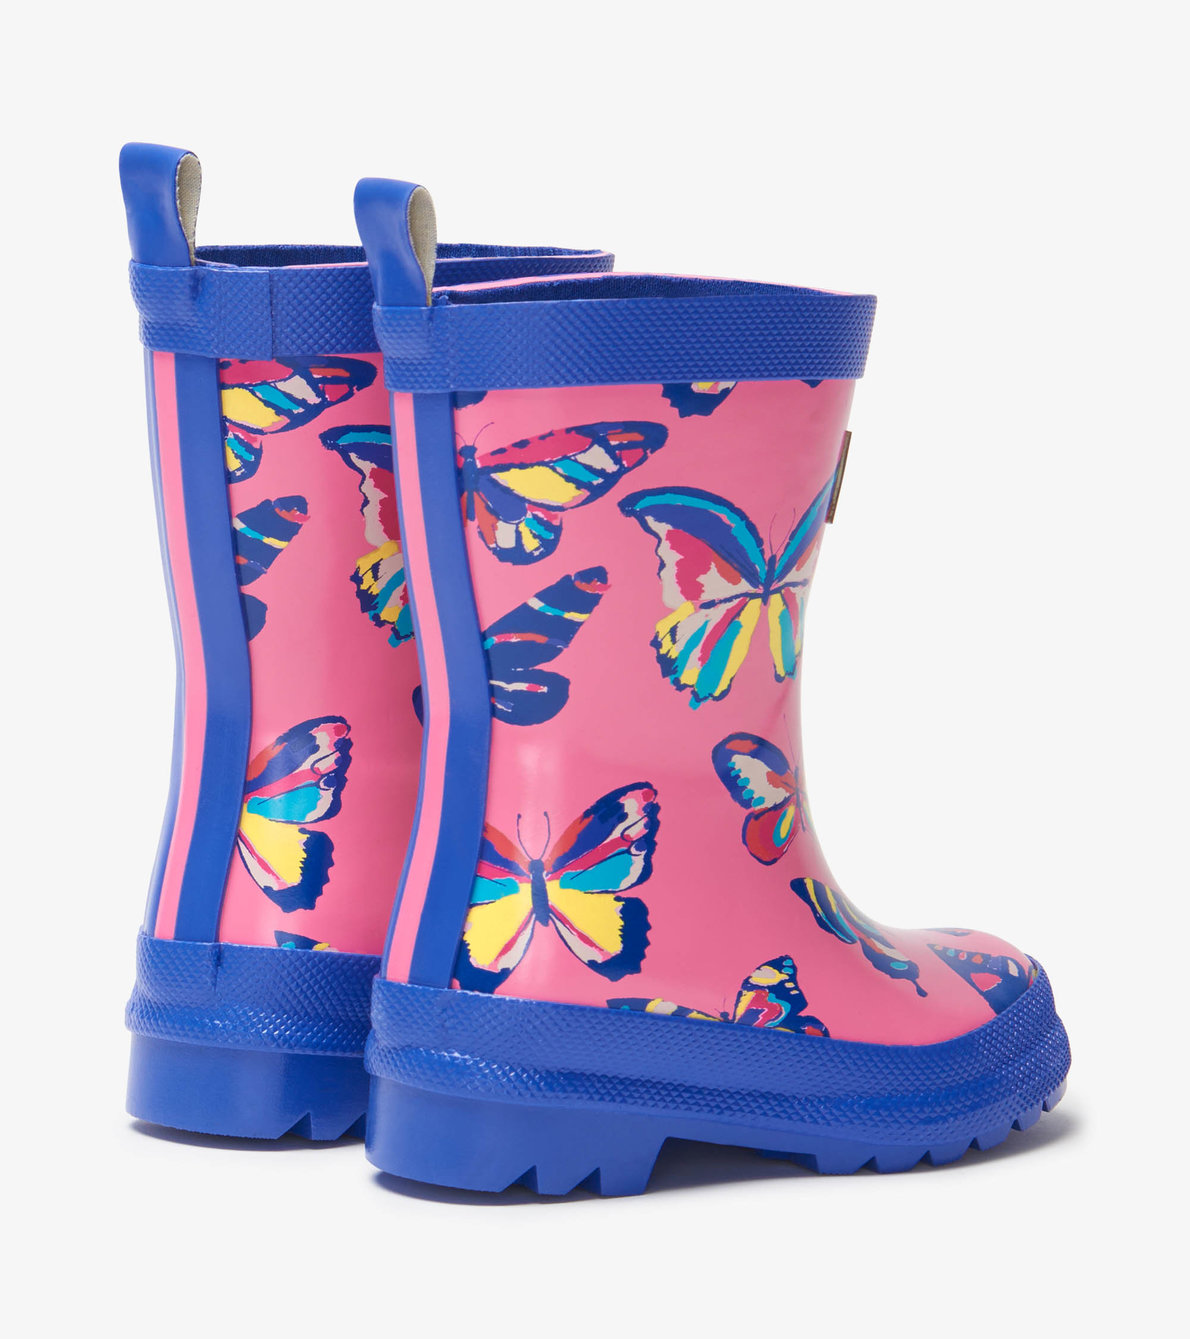 View larger image of My 1st Rain Boots - Vibrant Butterflies